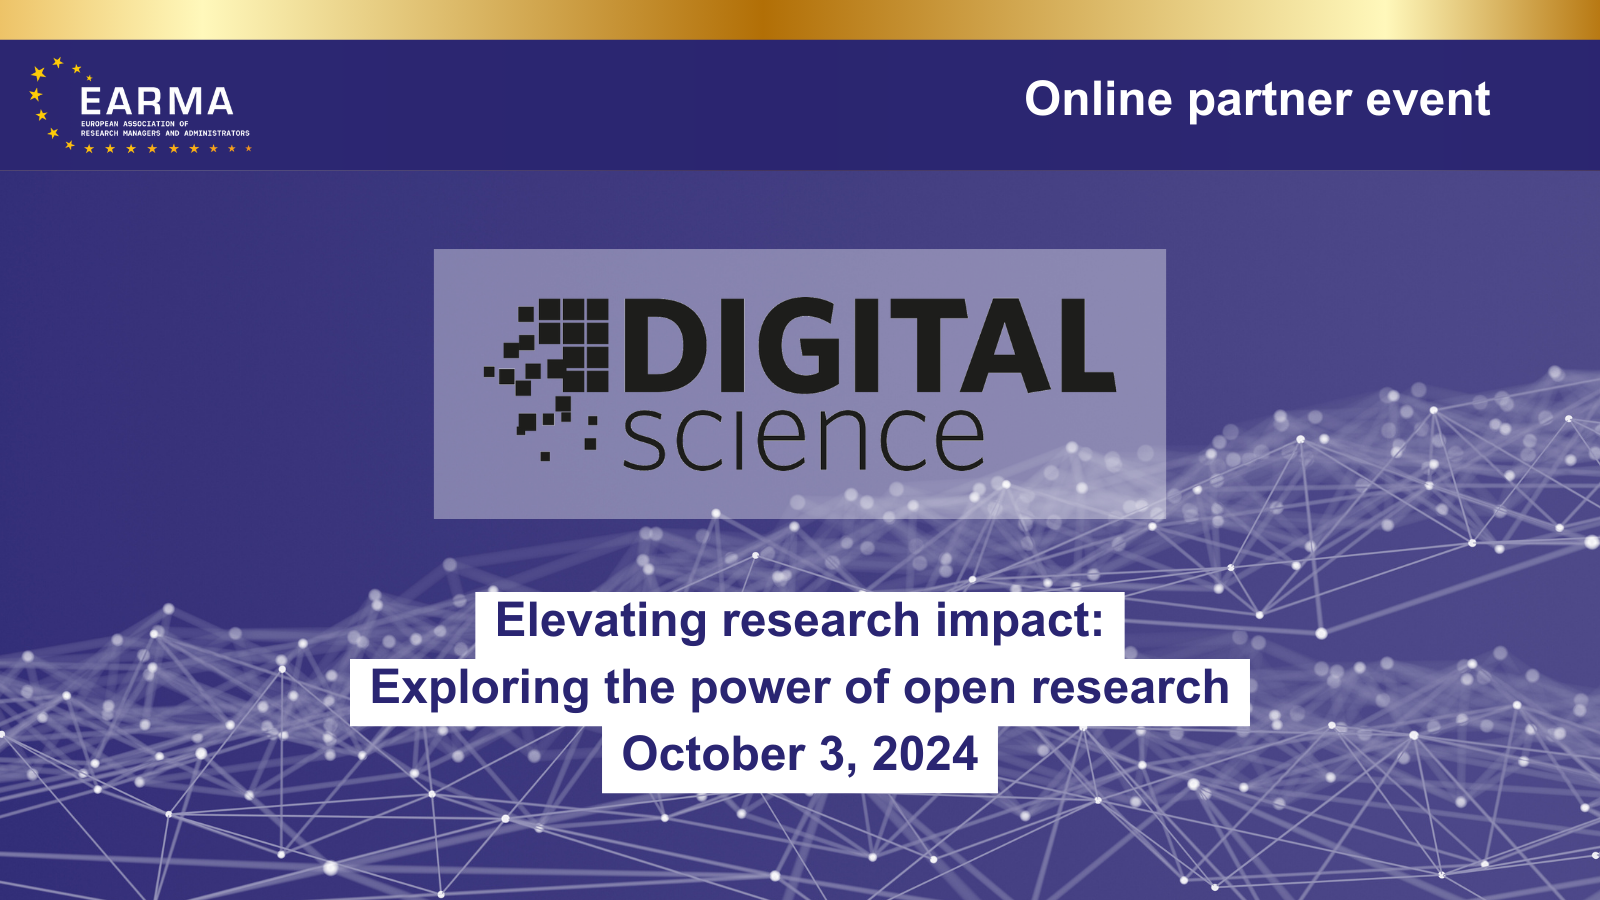 Elevating research impact: exploring the power of open research